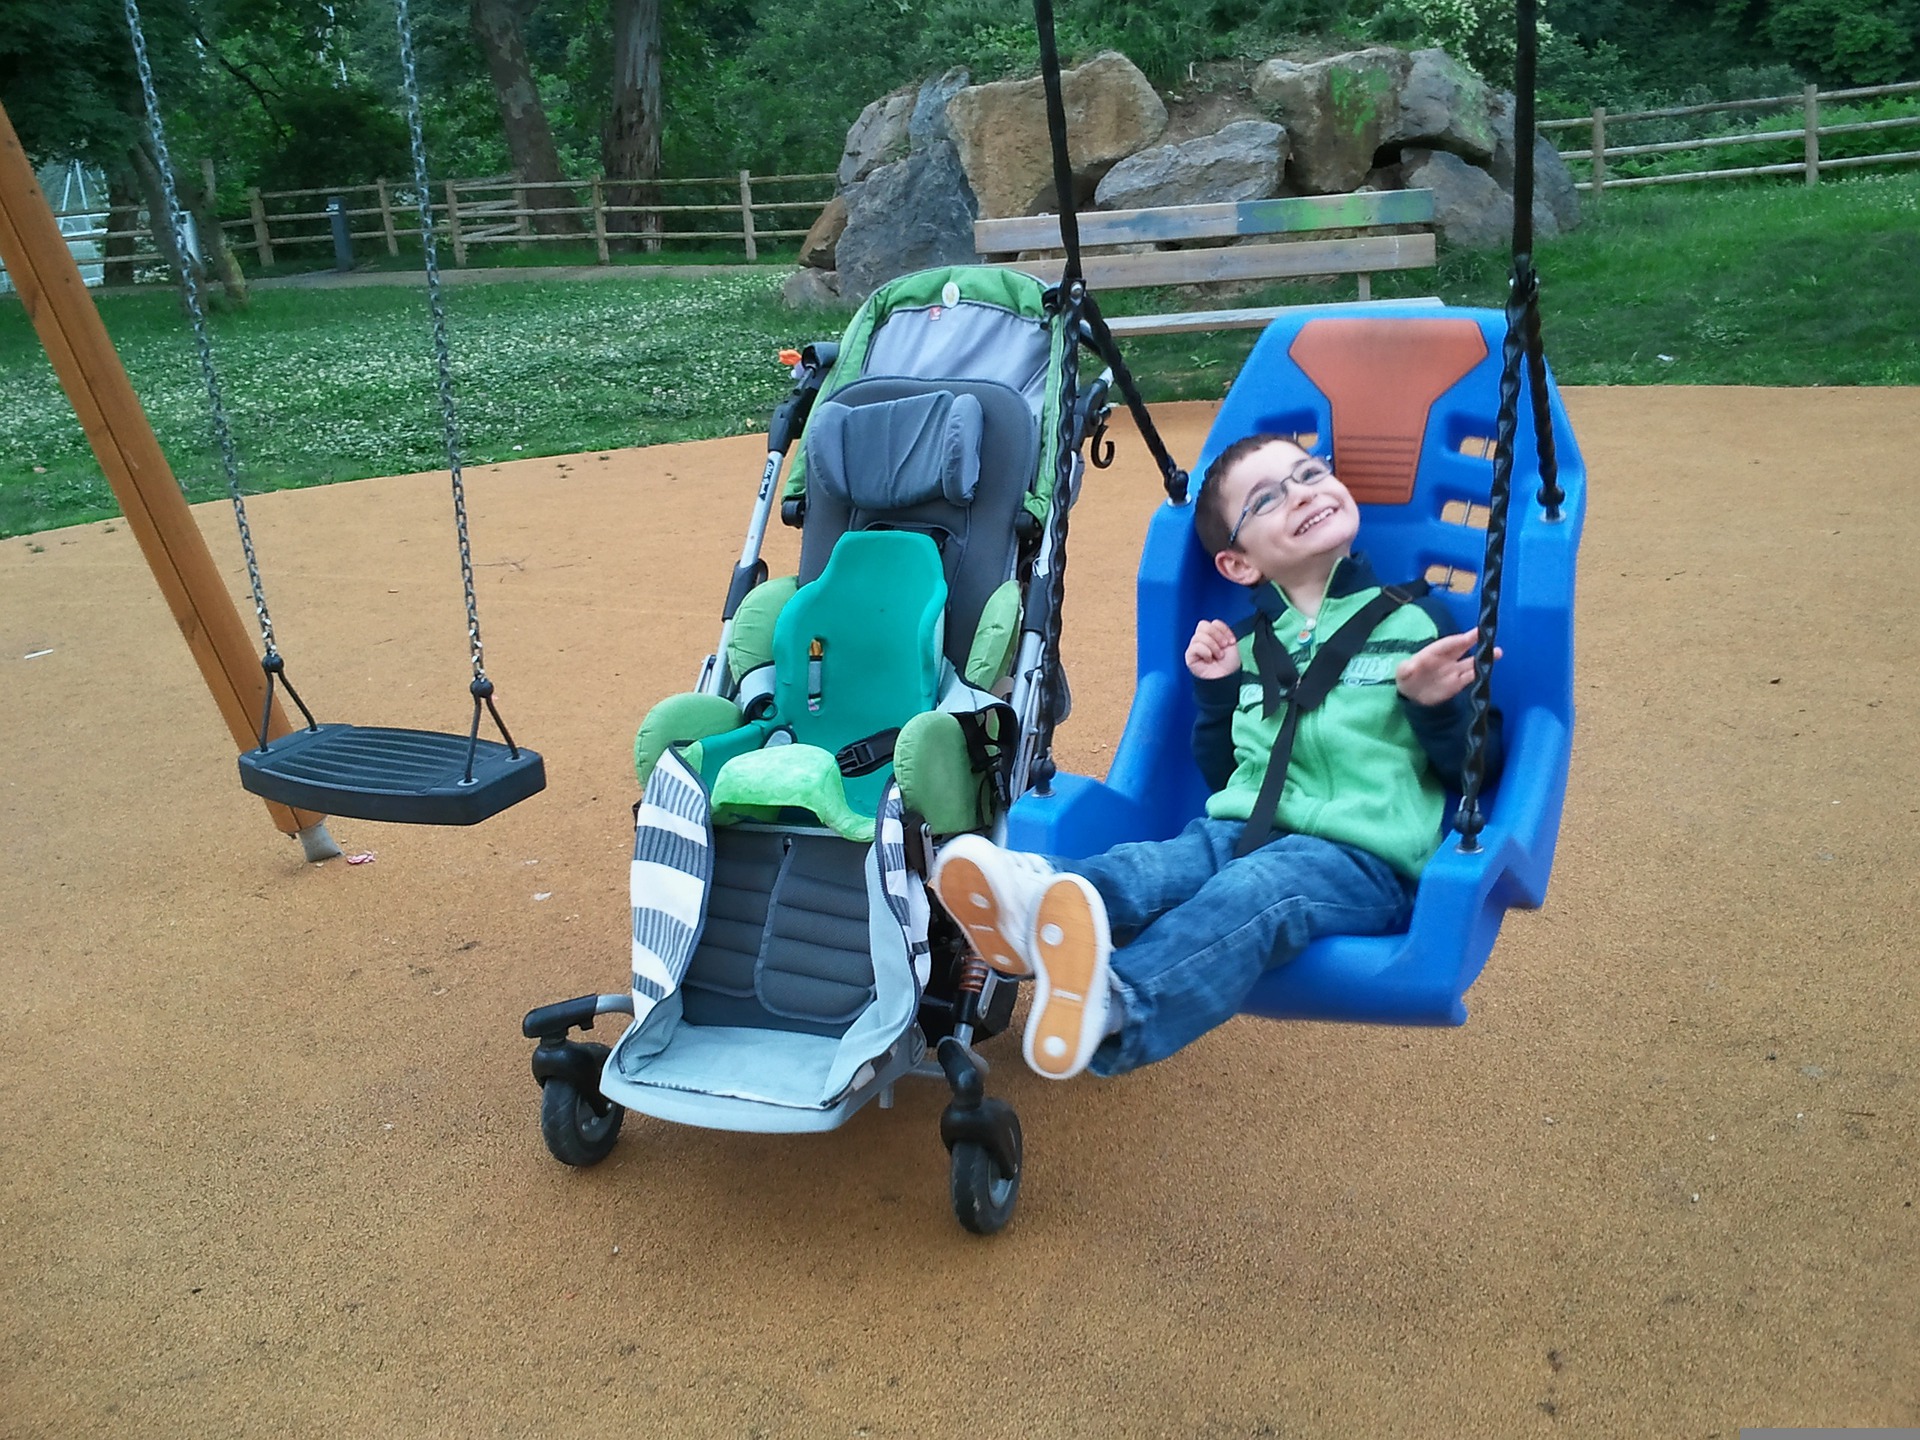 A disabled child in a specially designed swing